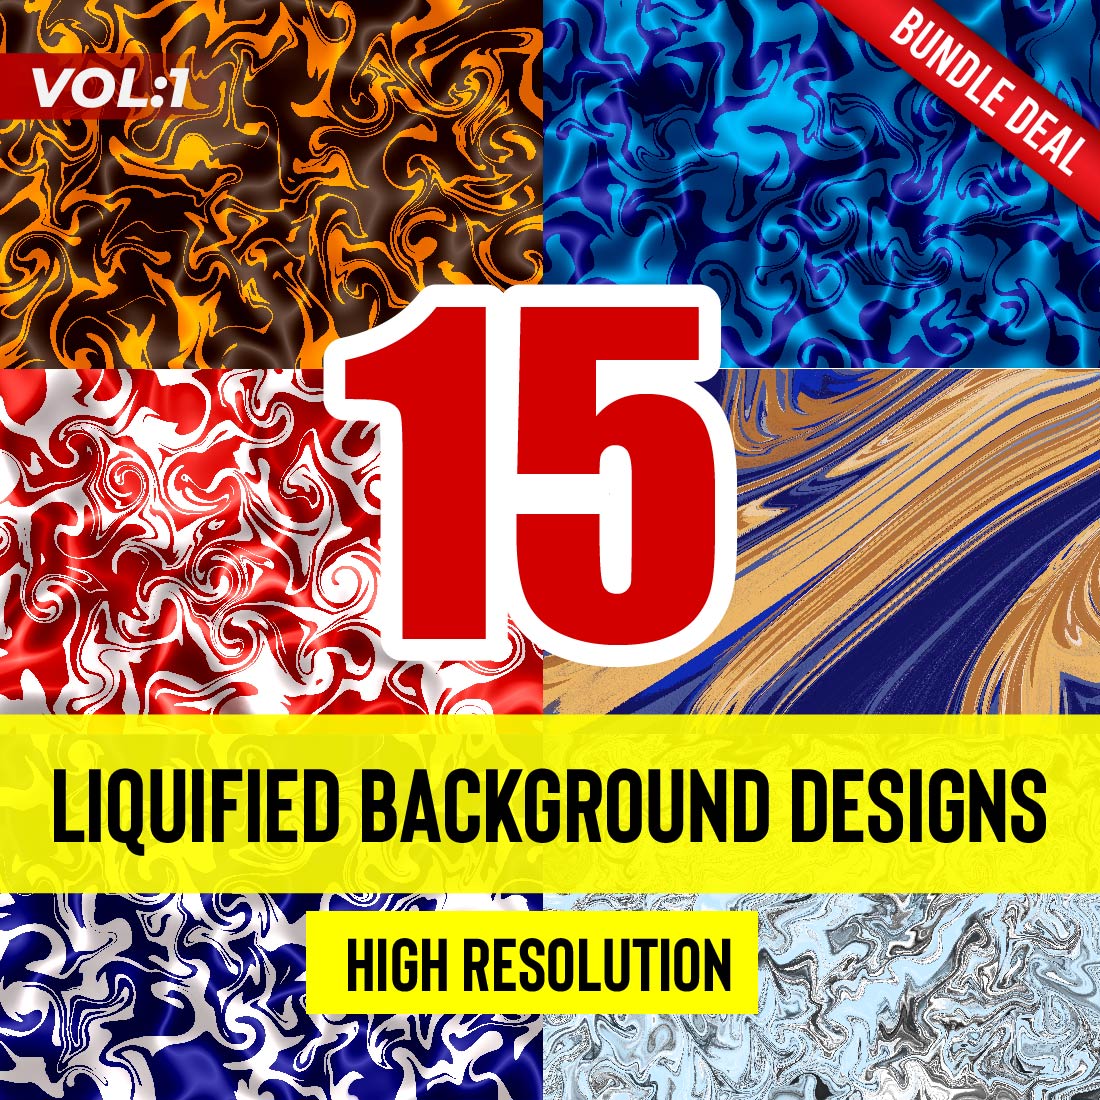 15+ Beautiful Modern Liquified Background Designs - Only for $10 cover image.